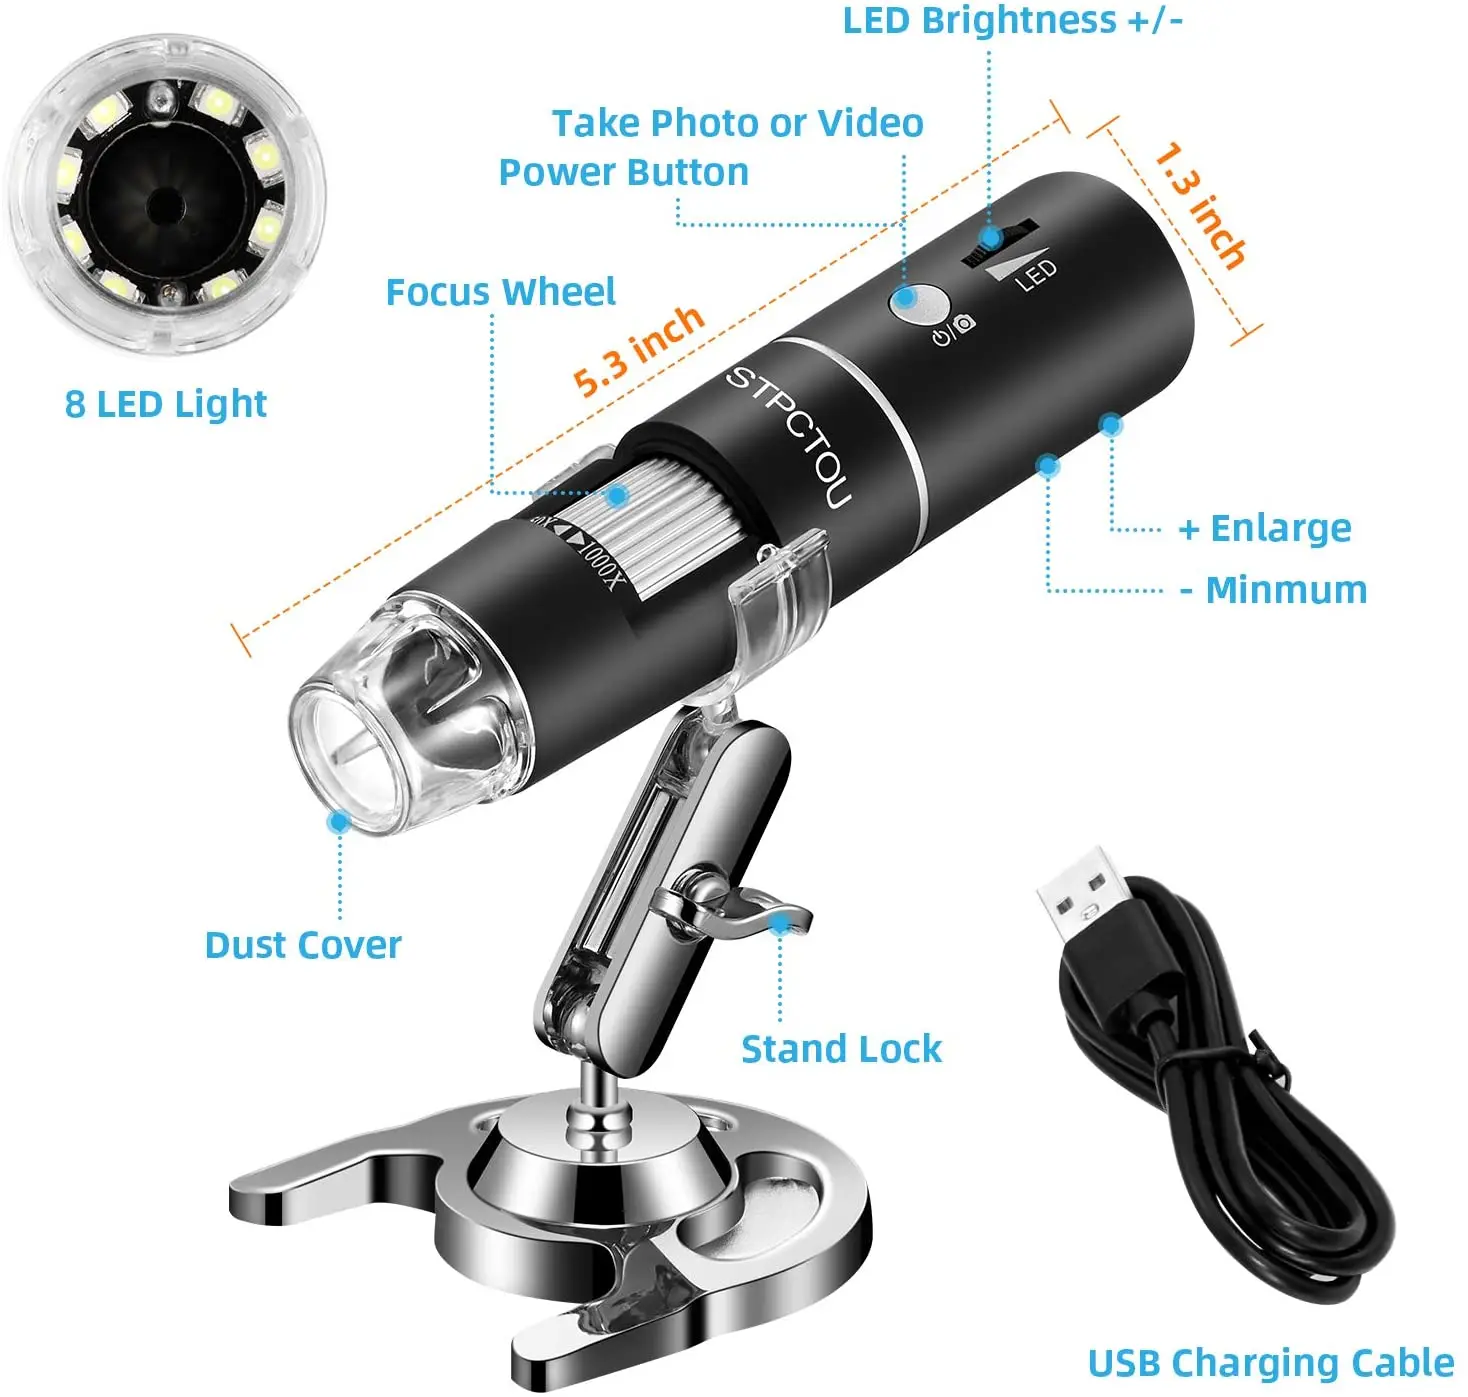 Fumei WiFi Digital Microscope 50X-1000X Magnification 2MP 1080P HD Camera 8 LED Lights Handheld or Desktop Observation Compatible with iPhone/iPad Android Windows/MacOS 